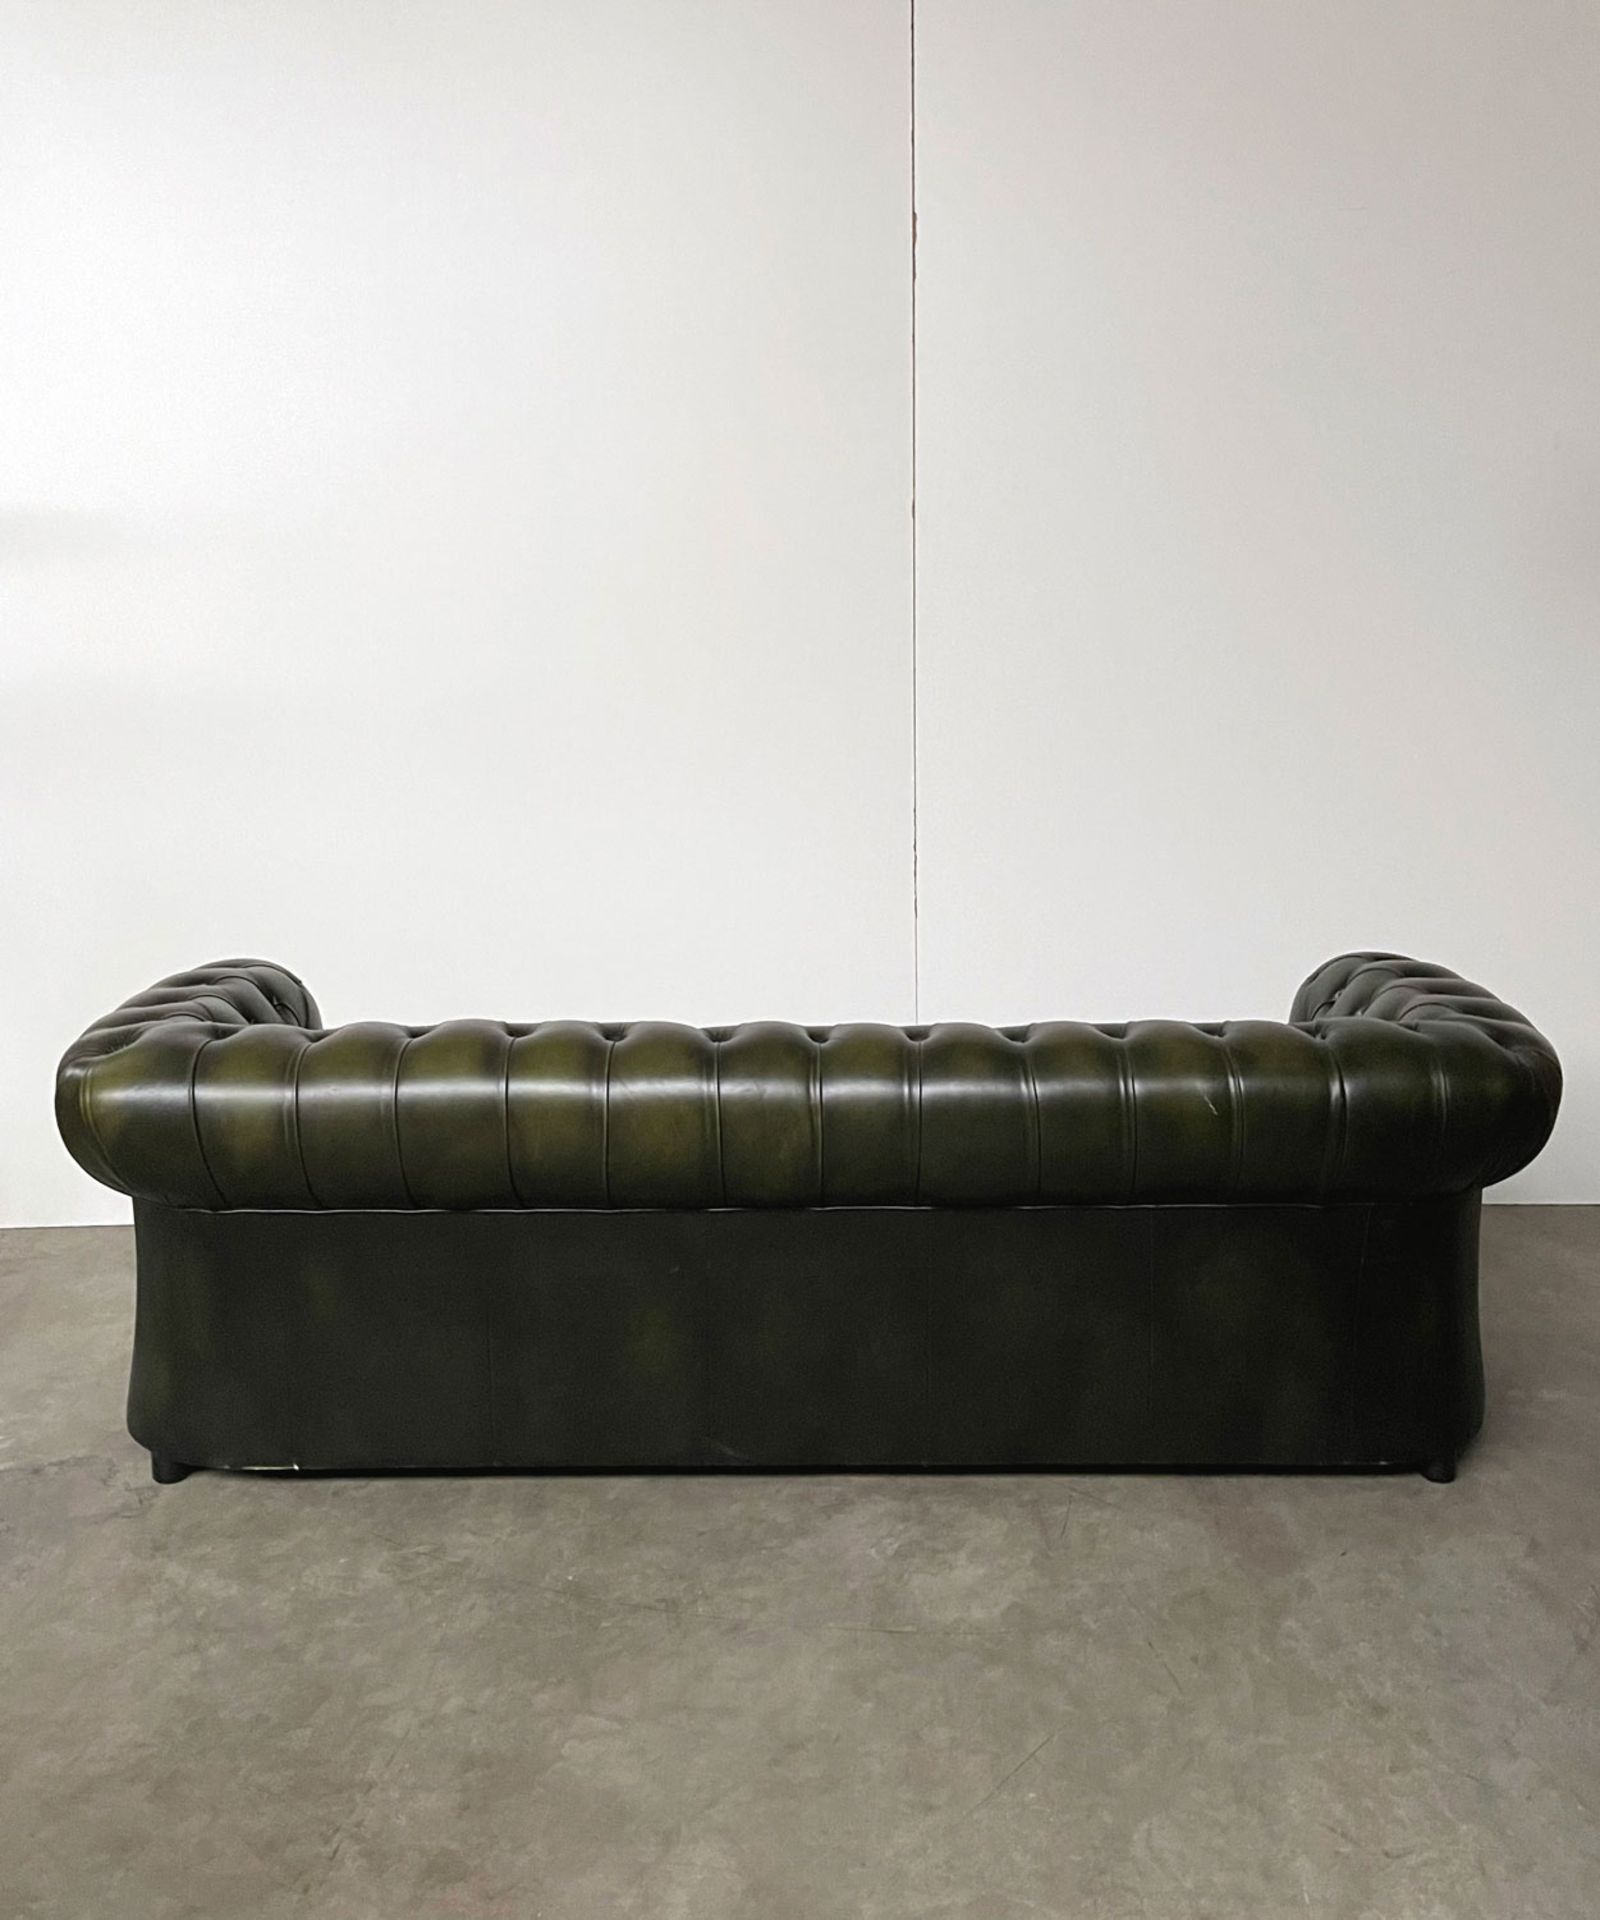 Green Leather Chesterfield Sofa - Image 5 of 10